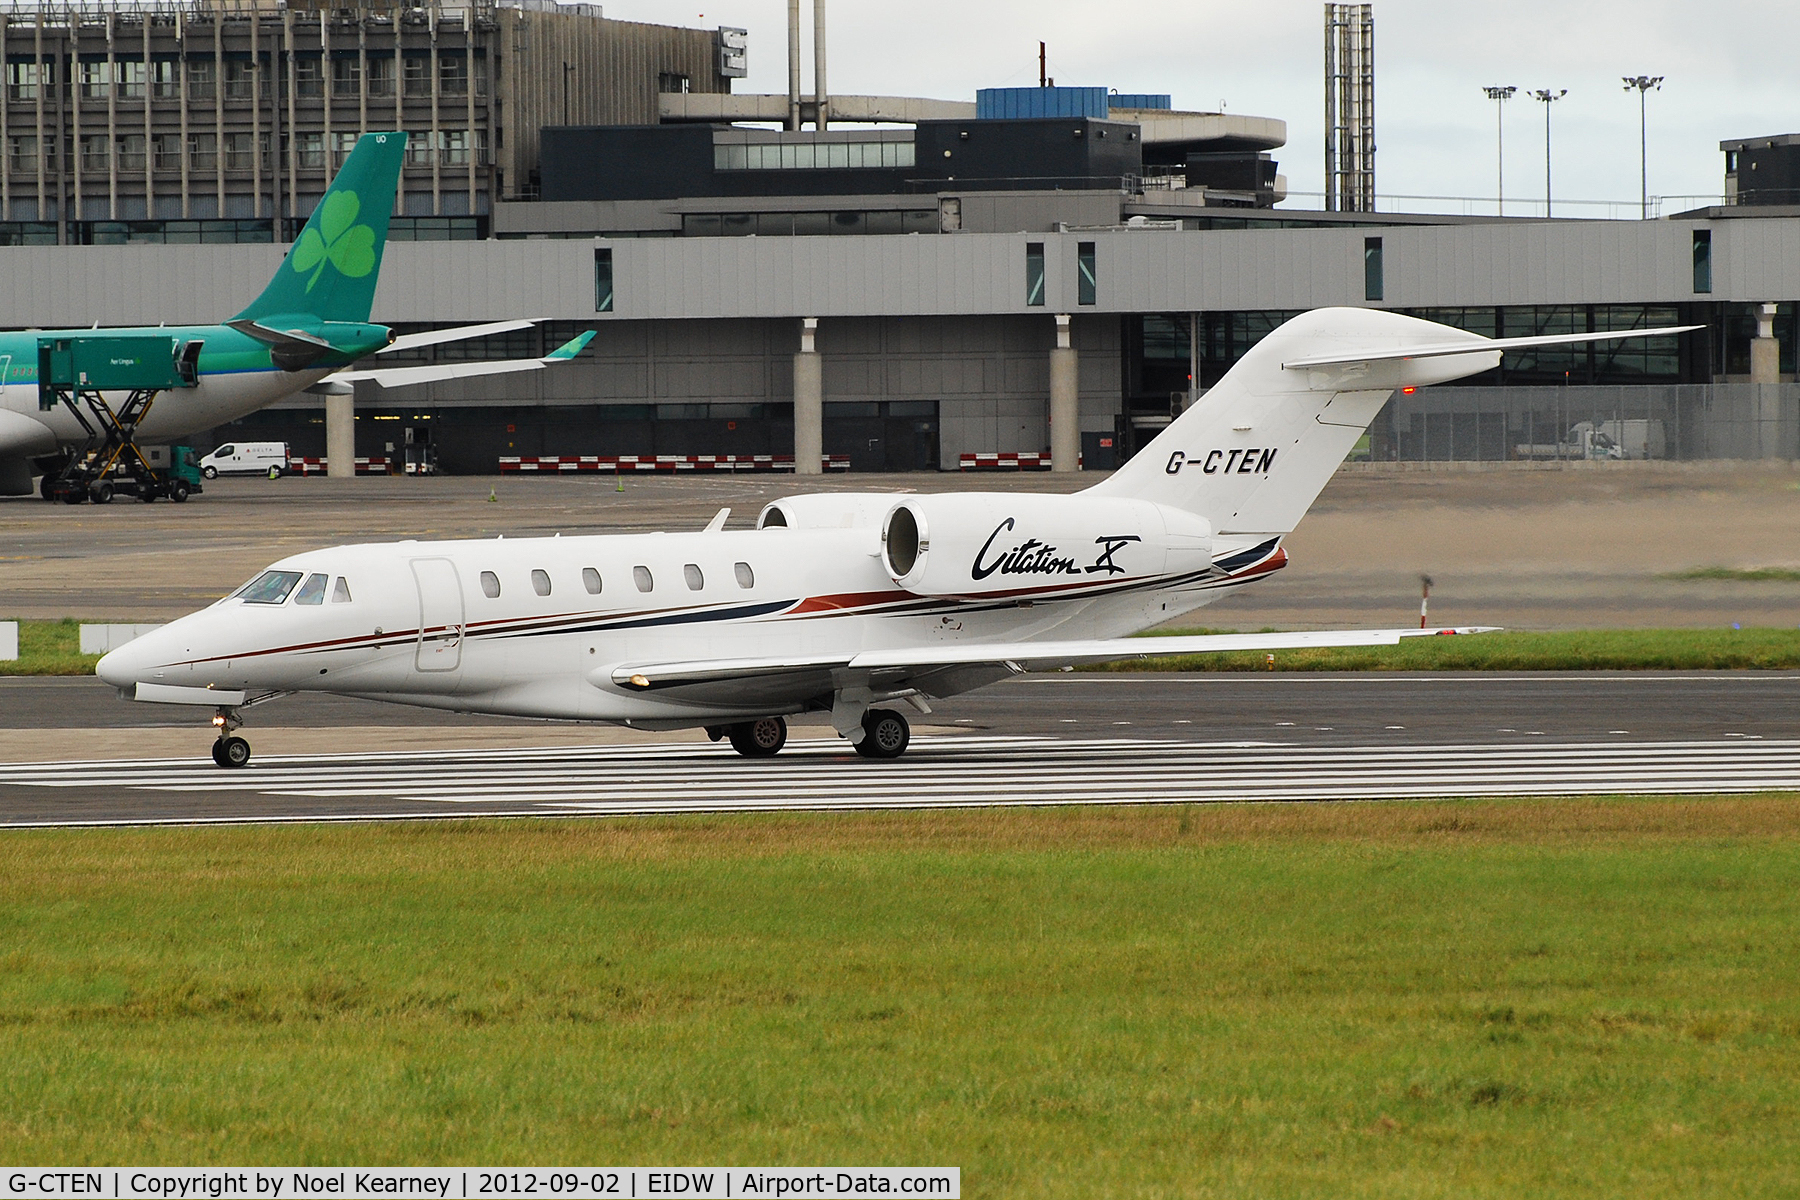 G-CTEN, 2008 Cessna 750 Citation X Citation X C/N 750-0281, Lined up for departure off Rwy 28 at EIDW.